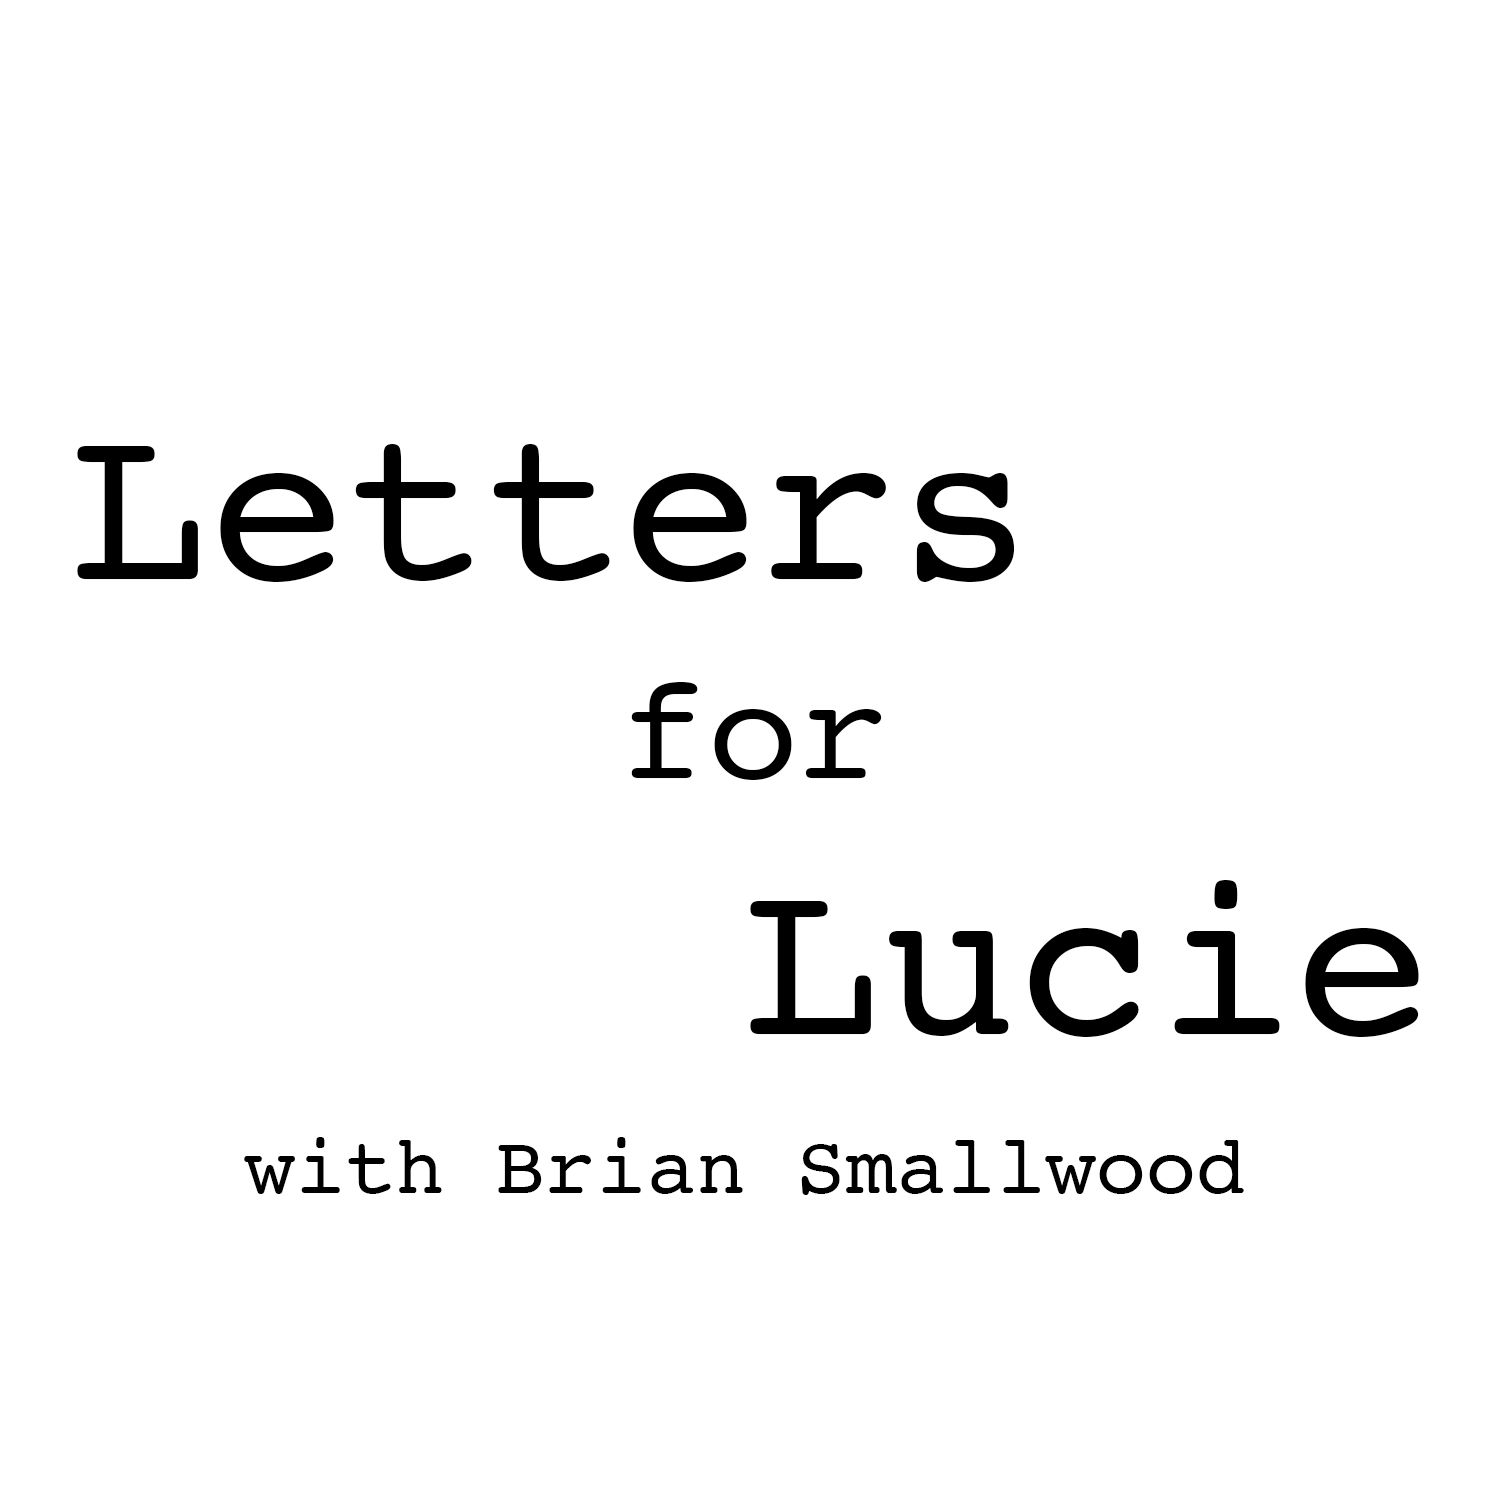 Letters for Lucie